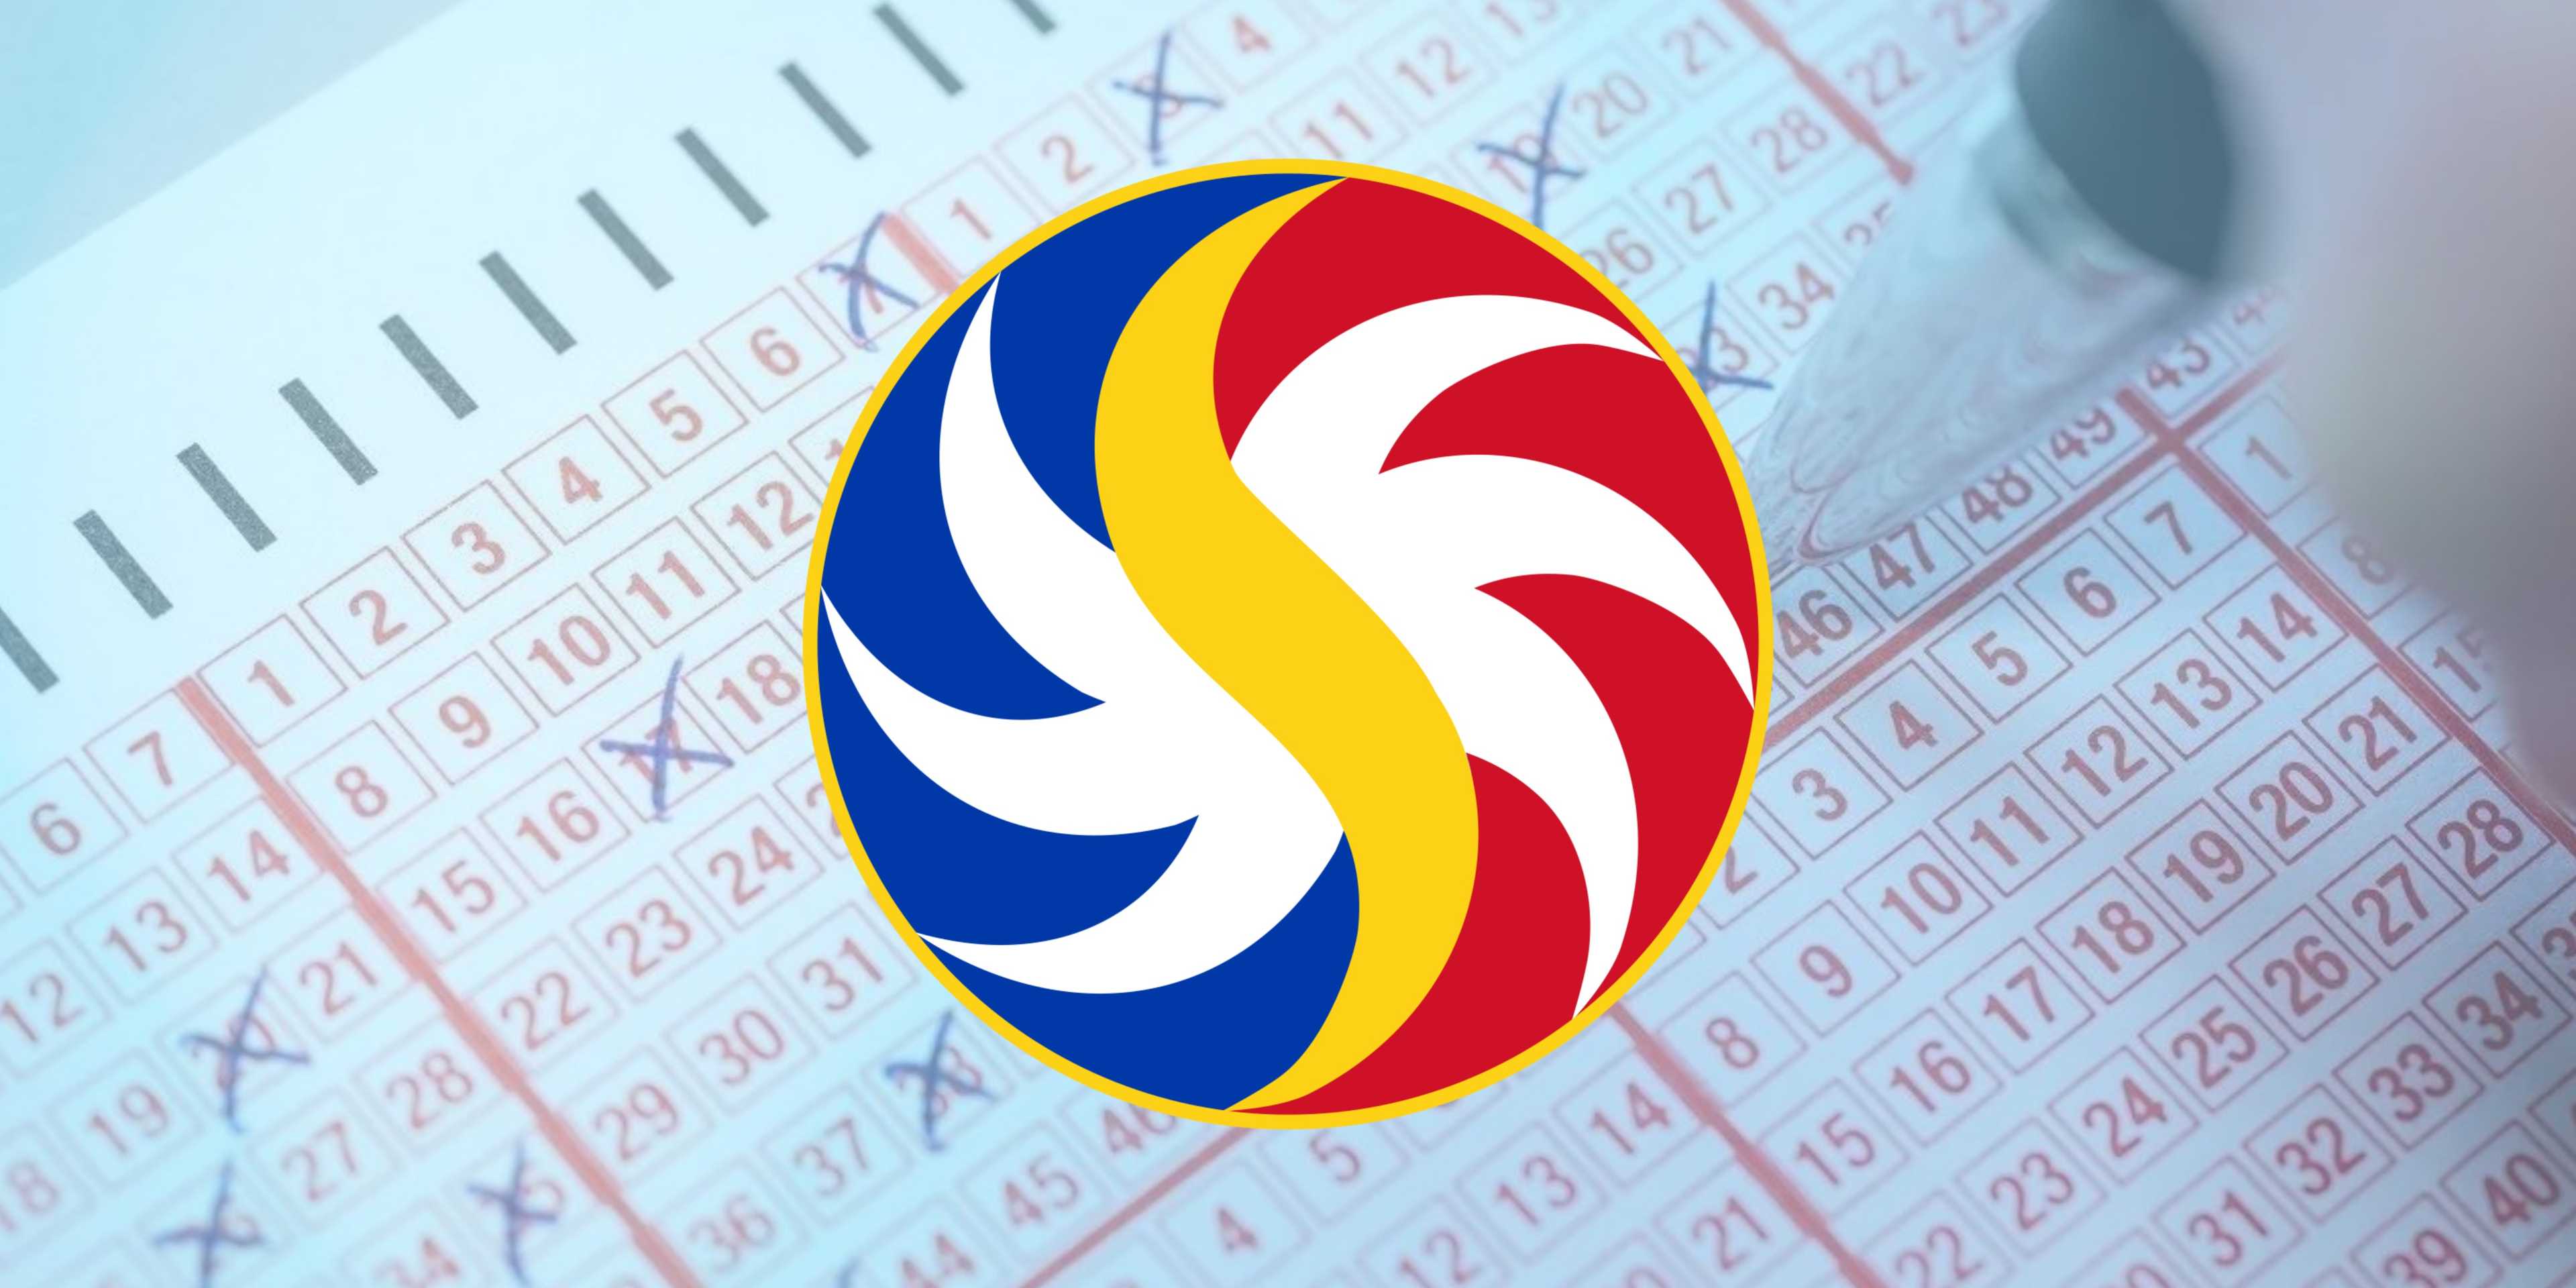 PCSO Lotto Draw Results on Tuesday, March 5